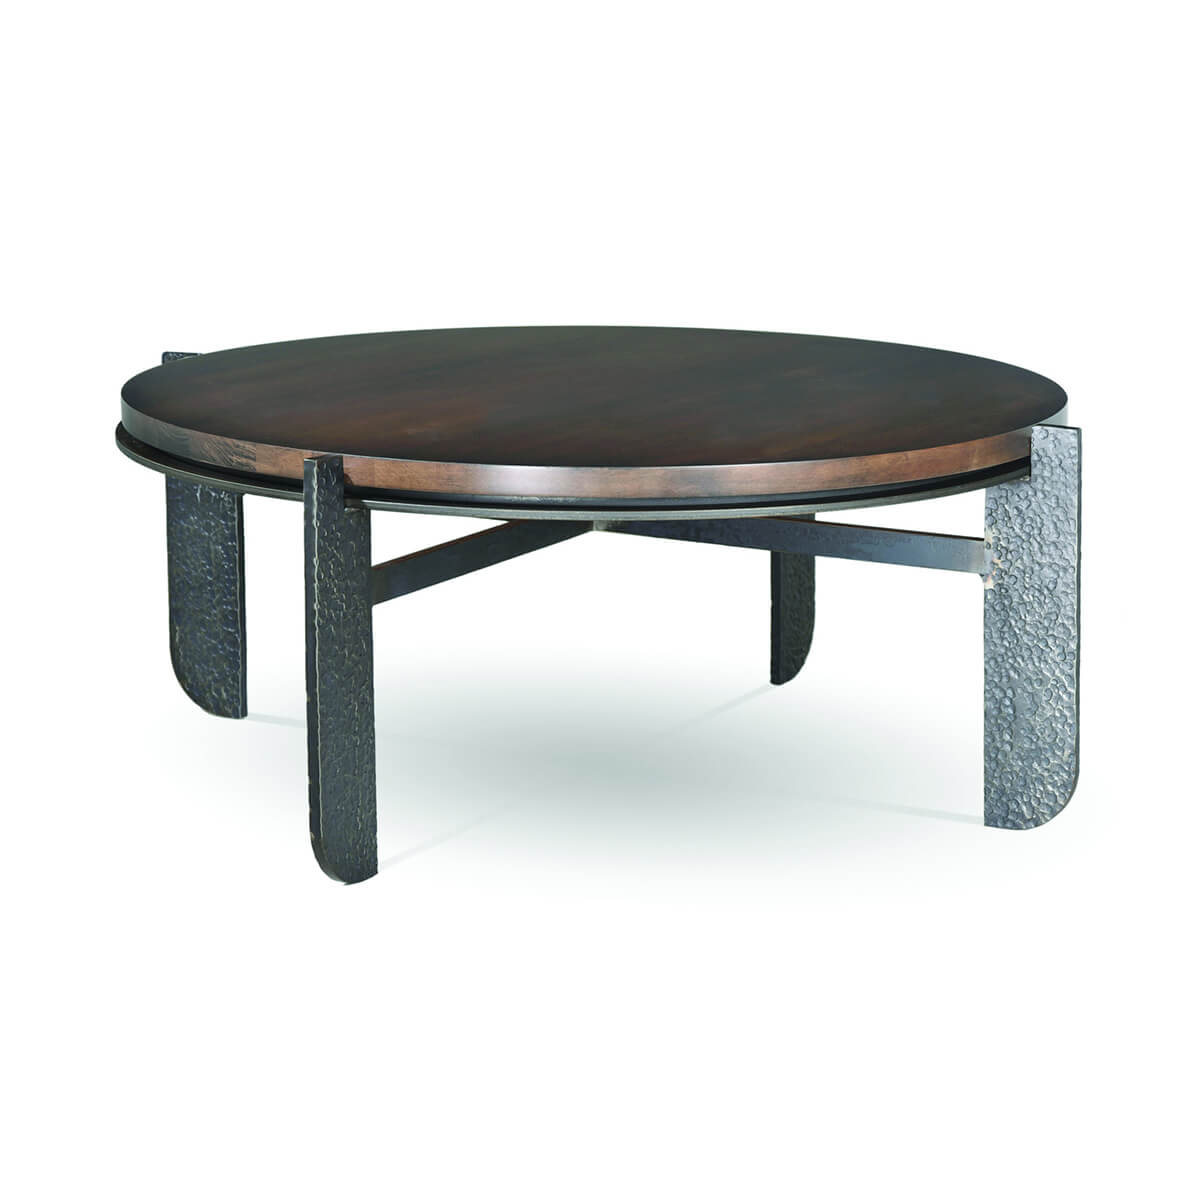 Read more about the article Ashford 36 Inch Round Cocktail Table